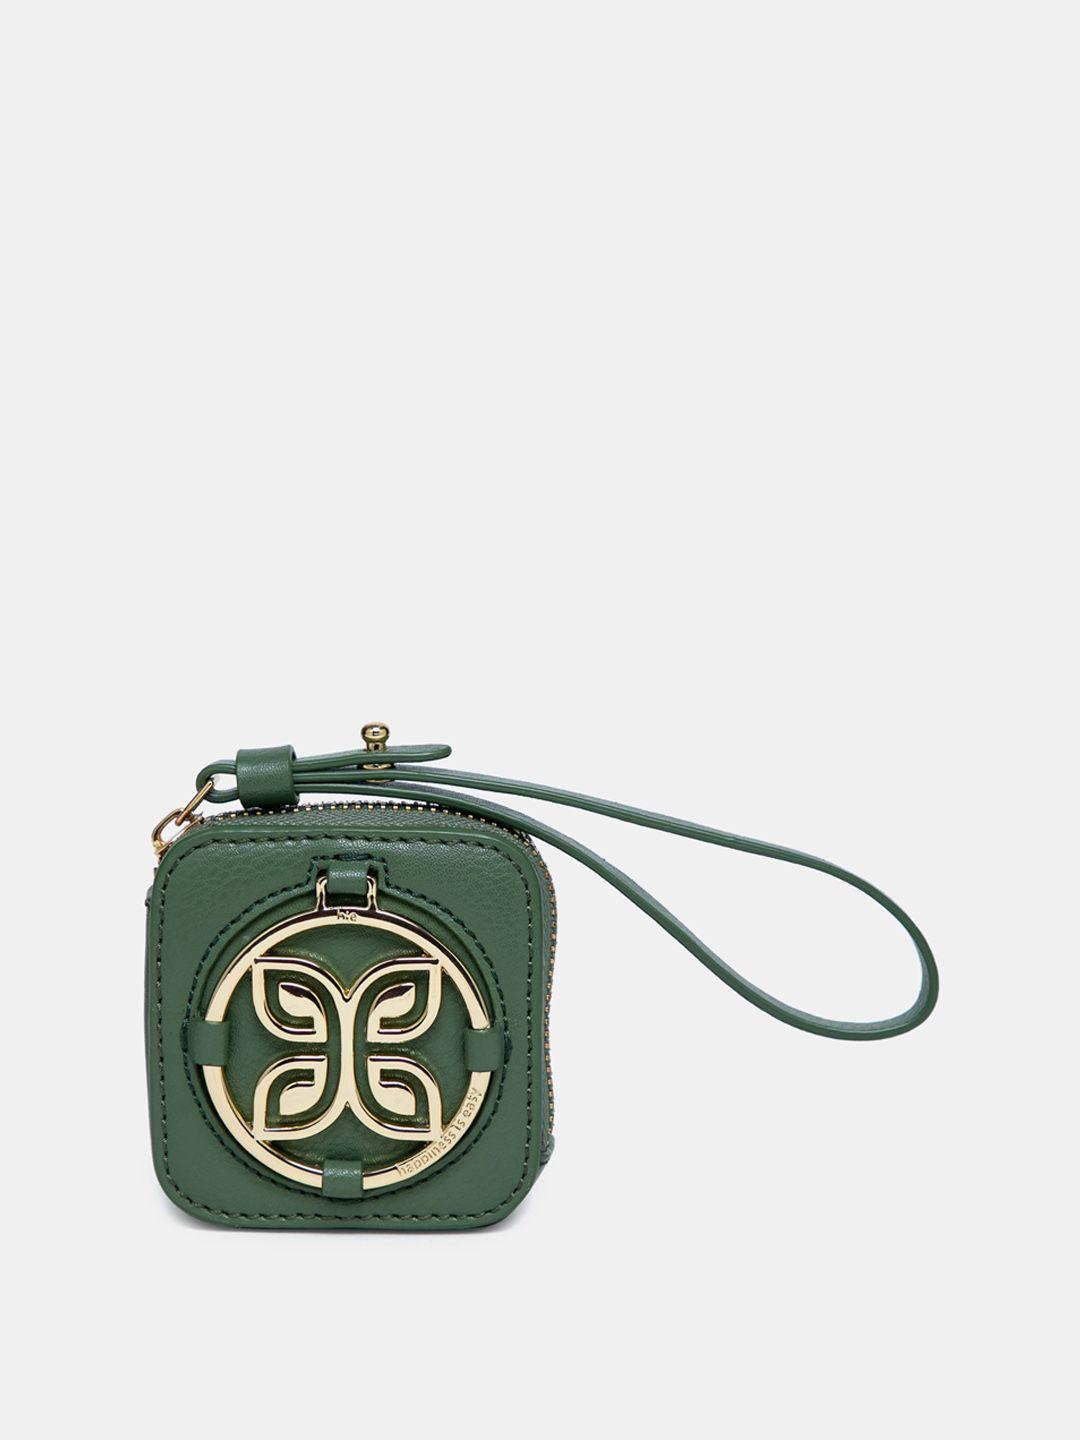 hie textured pu structured sling bag with applique